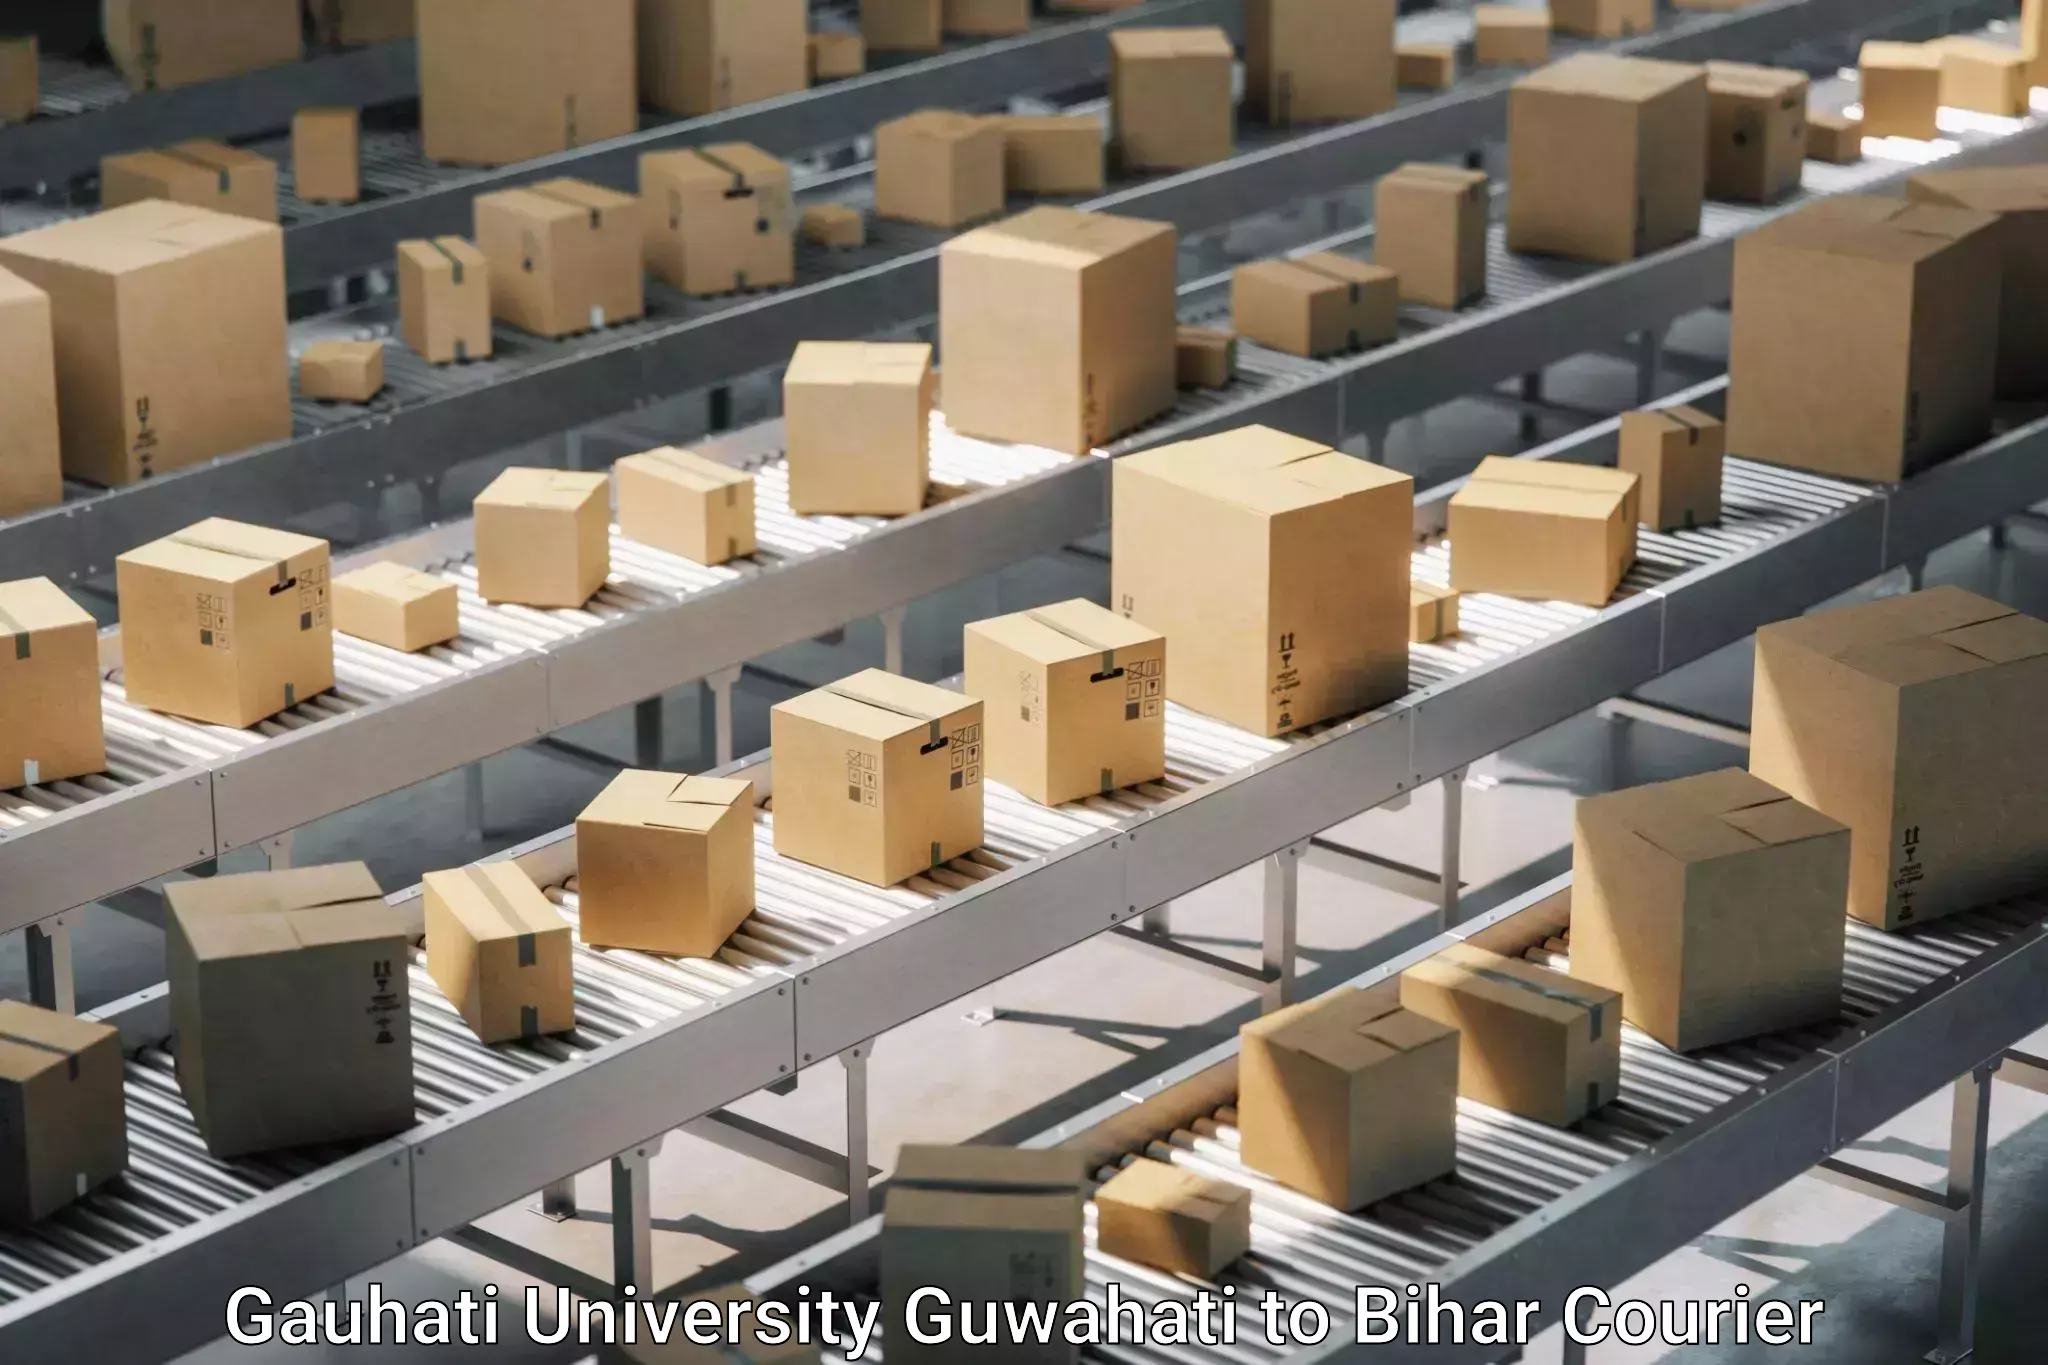 Affordable relocation services Gauhati University Guwahati to Aurai